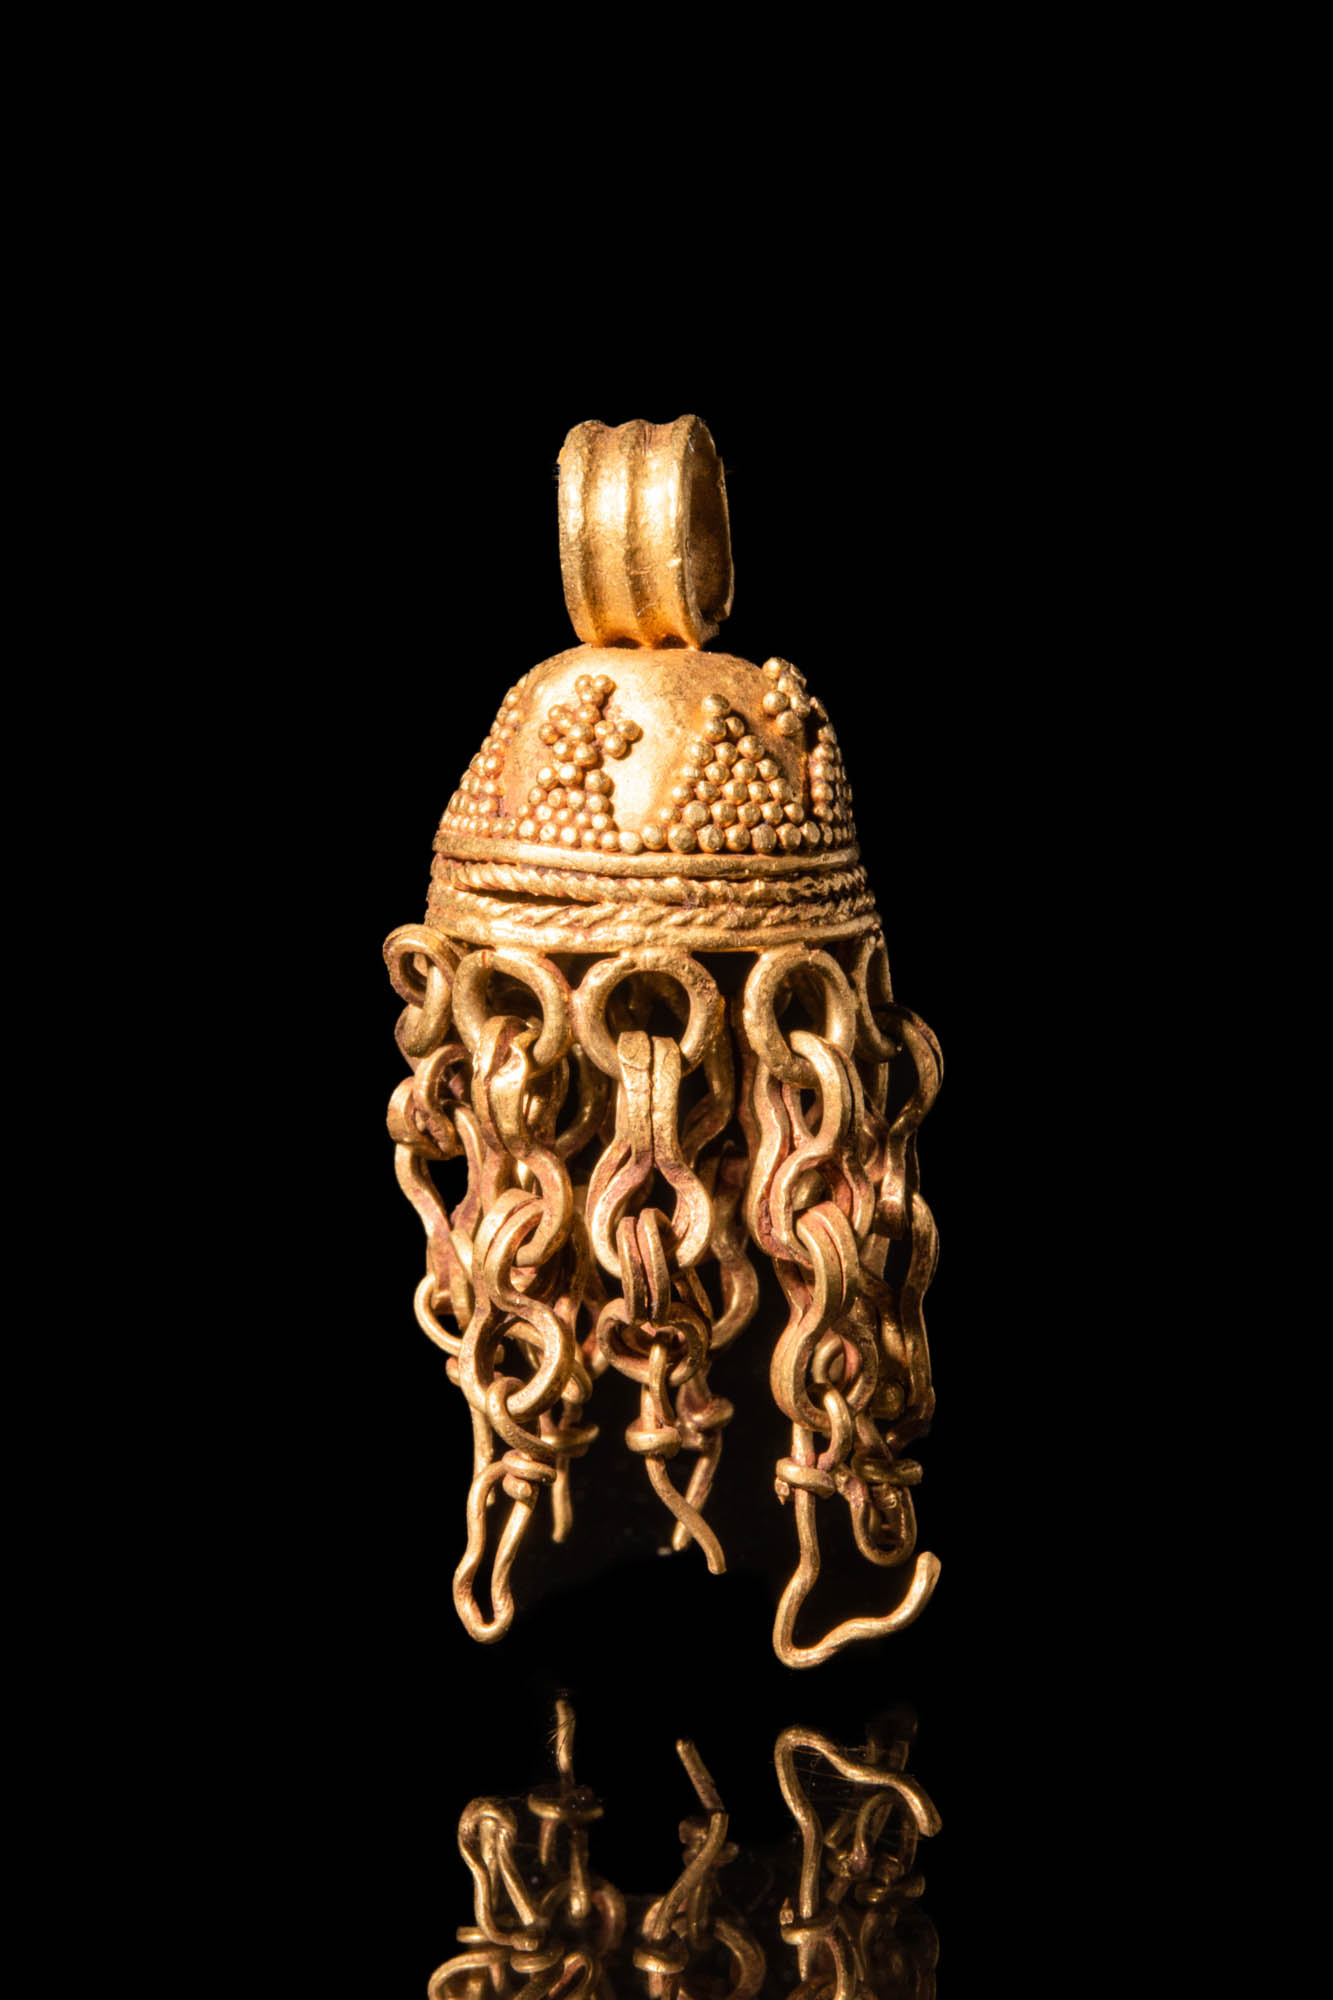 PARTHIAN GOLD PENDANT DECORATED WITH GEOMETRIC MOTIFS IN FILIGREE - Image 3 of 3